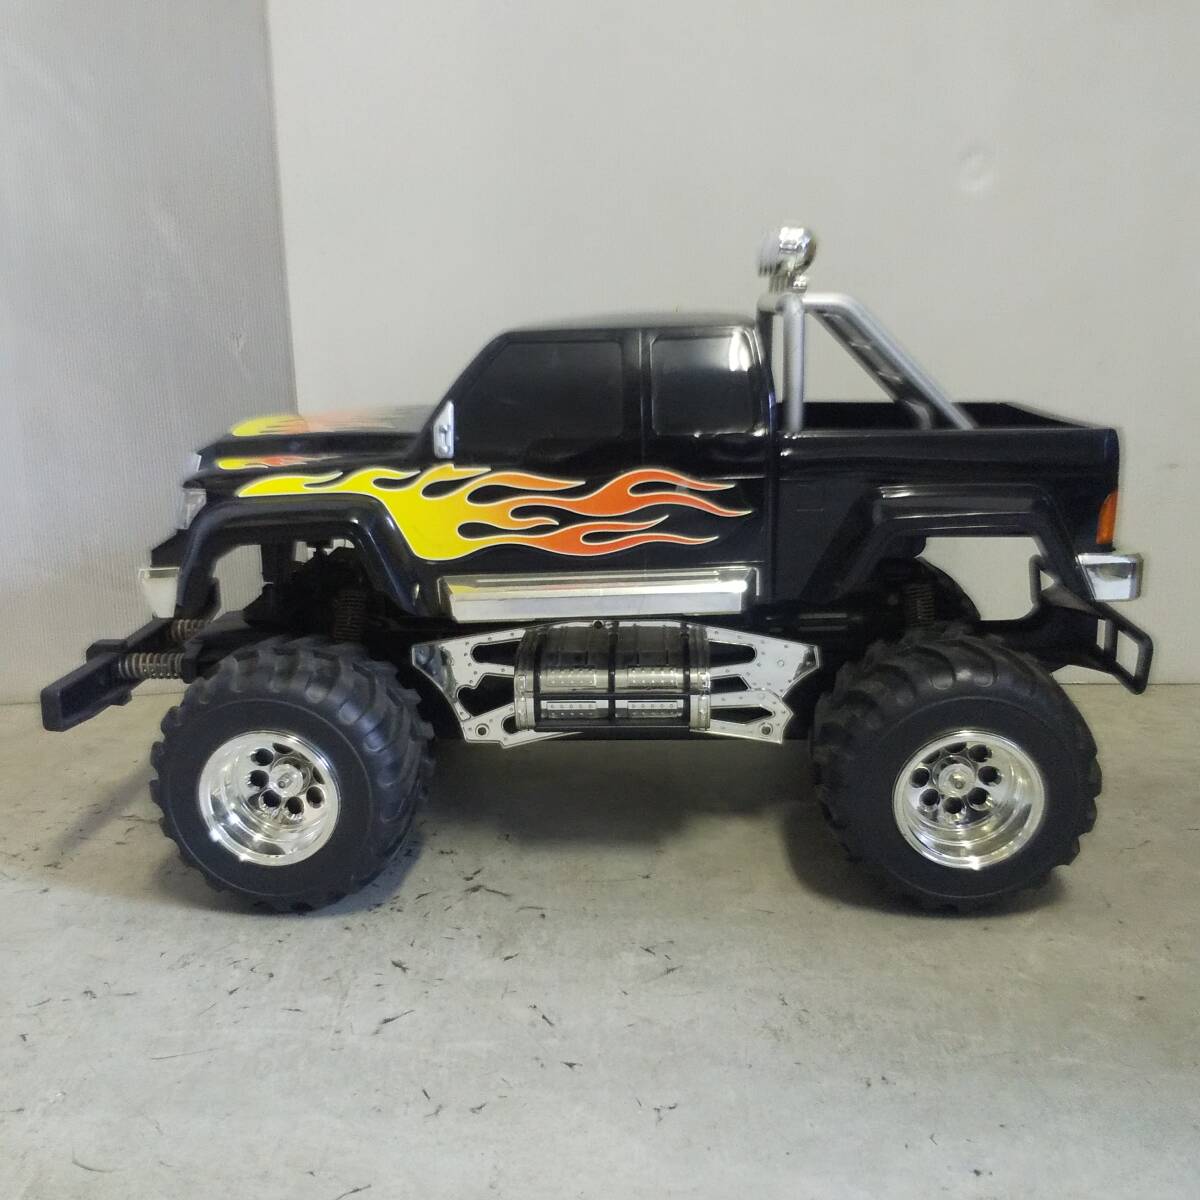 *RC pickup truck BIG size radio-controller Manufacturers unknown car body only Junk *C2461